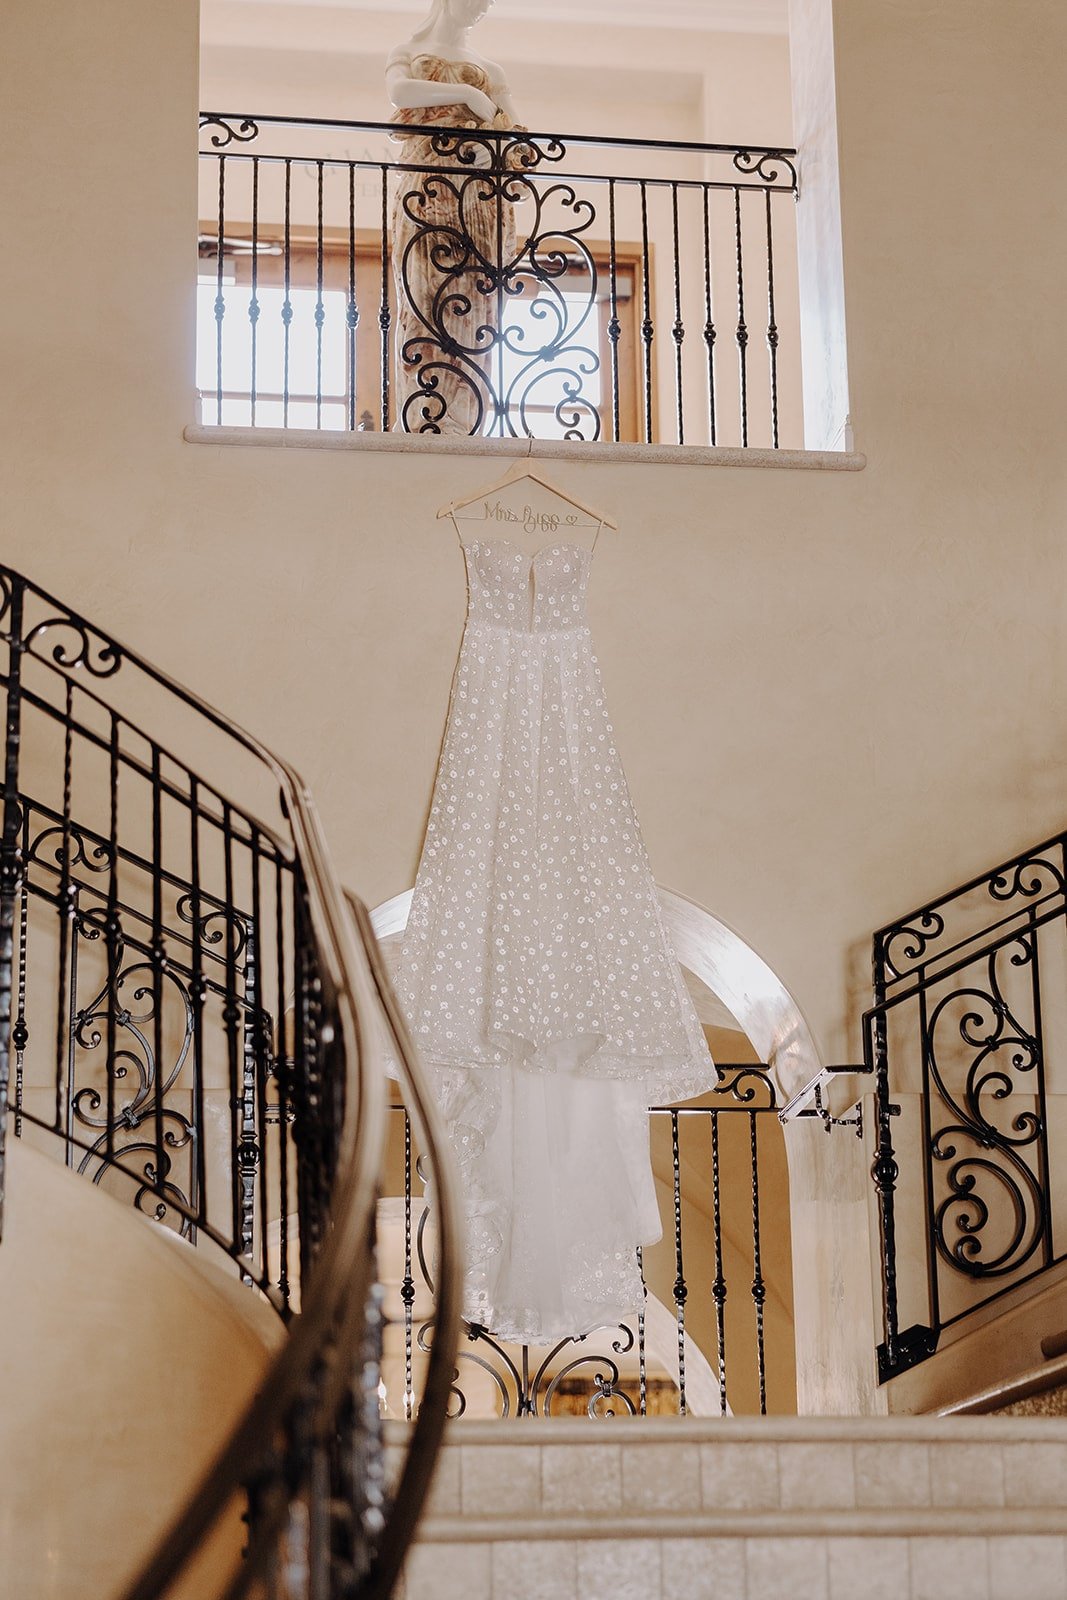 White wedding dress hanging from the balcony at luxury wedding venue in California